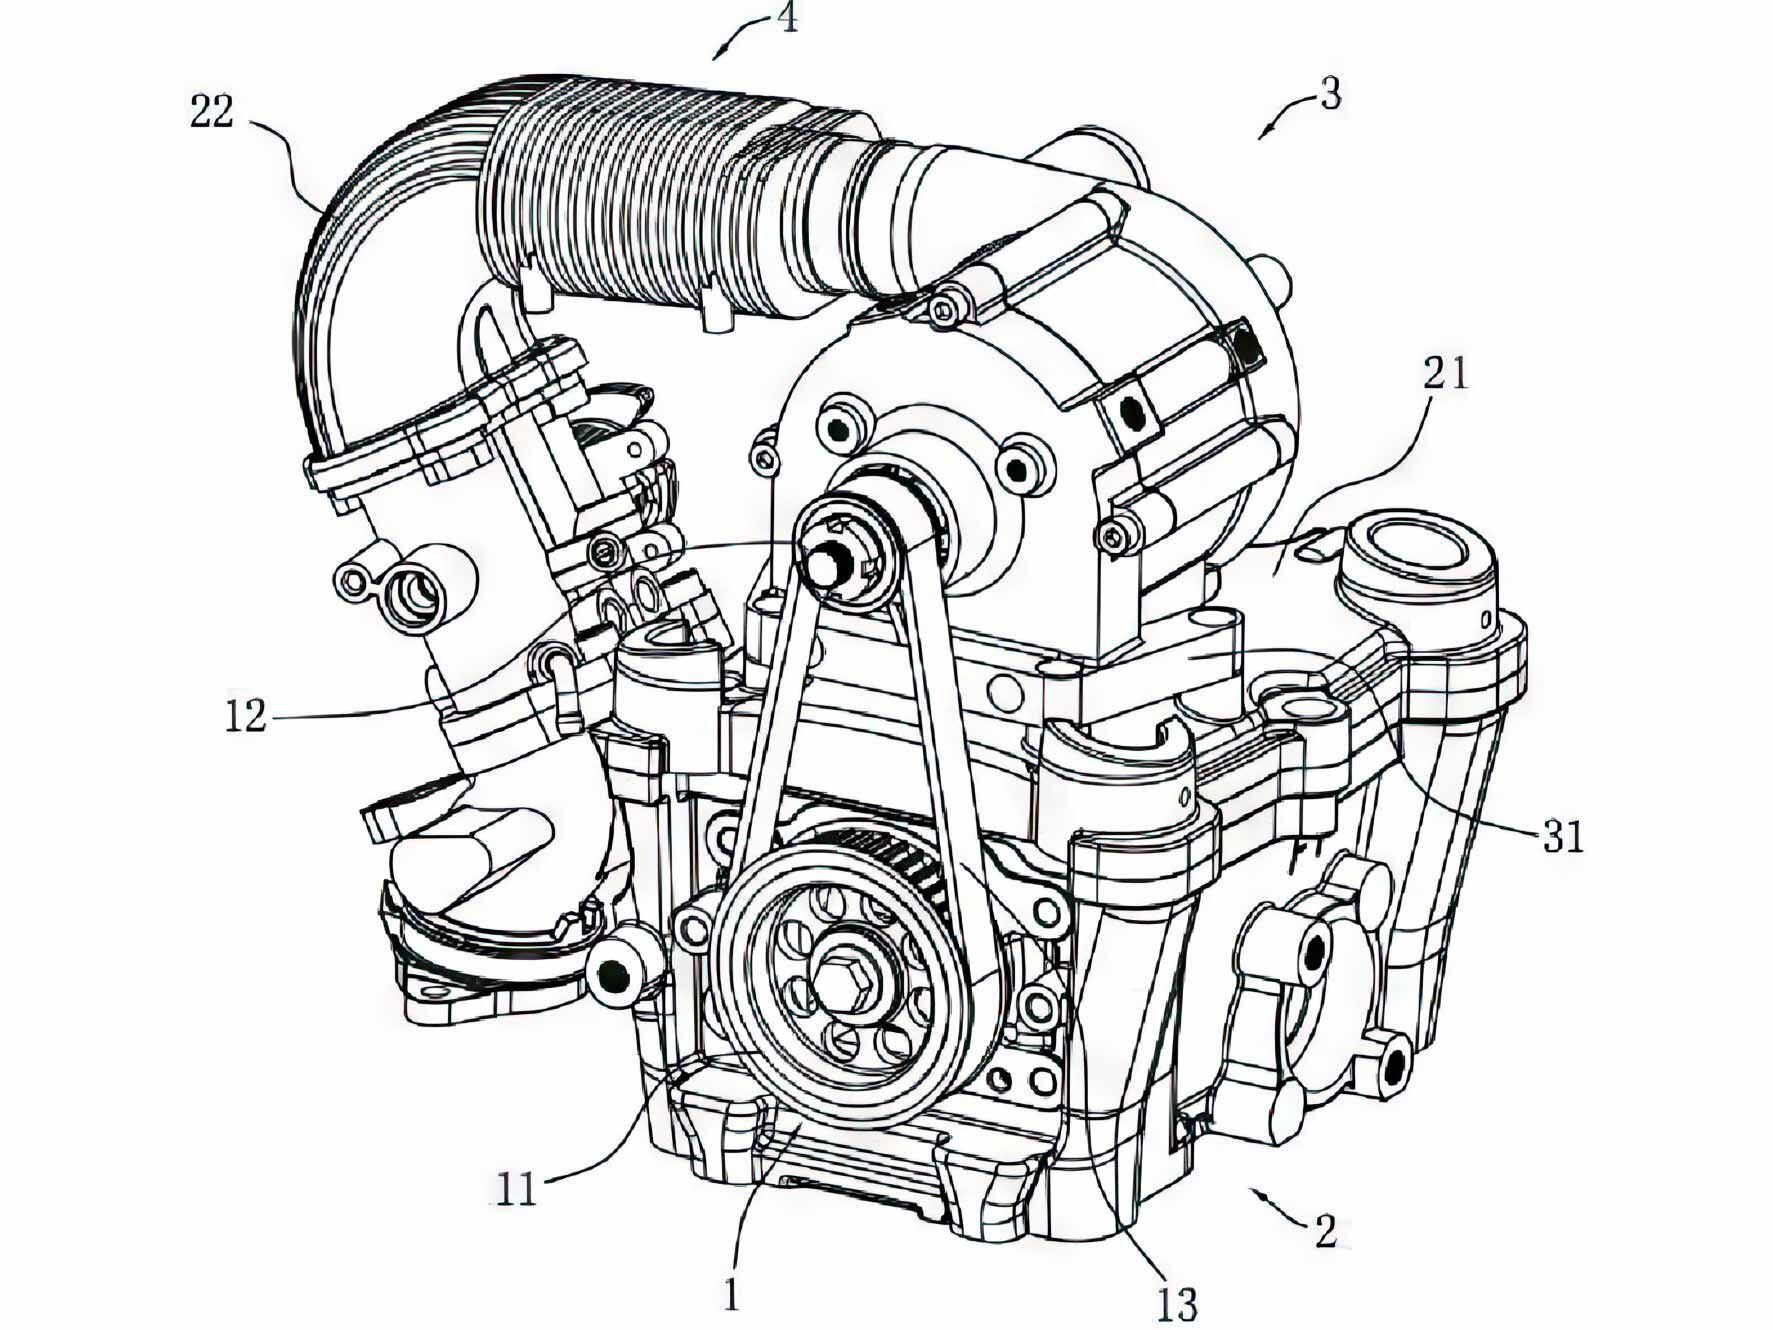 Benda has patent documents showing this supercharger, which is interestingly driven off a camshaft.